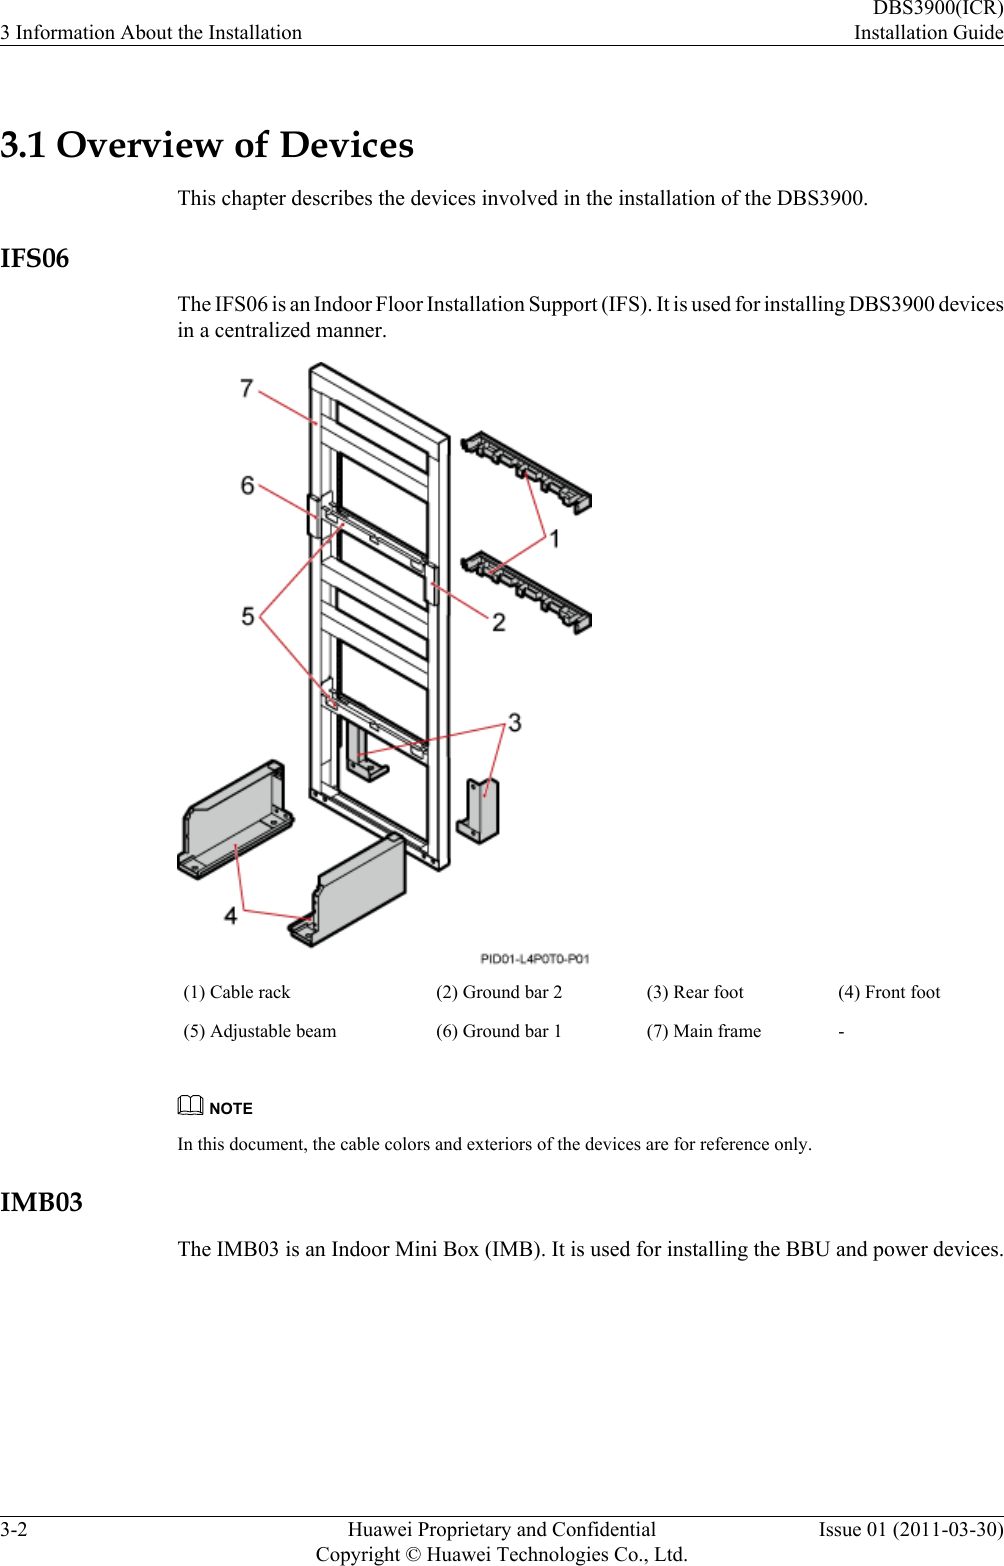 3.1 Overview of DevicesThis chapter describes the devices involved in the installation of the DBS3900.IFS06The IFS06 is an Indoor Floor Installation Support (IFS). It is used for installing DBS3900 devicesin a centralized manner.(1) Cable rack (2) Ground bar 2 (3) Rear foot (4) Front foot(5) Adjustable beam (6) Ground bar 1 (7) Main frame -NOTEIn this document, the cable colors and exteriors of the devices are for reference only.IMB03The IMB03 is an Indoor Mini Box (IMB). It is used for installing the BBU and power devices.3 Information About the InstallationDBS3900(ICR)Installation Guide3-2 Huawei Proprietary and ConfidentialCopyright © Huawei Technologies Co., Ltd.Issue 01 (2011-03-30)